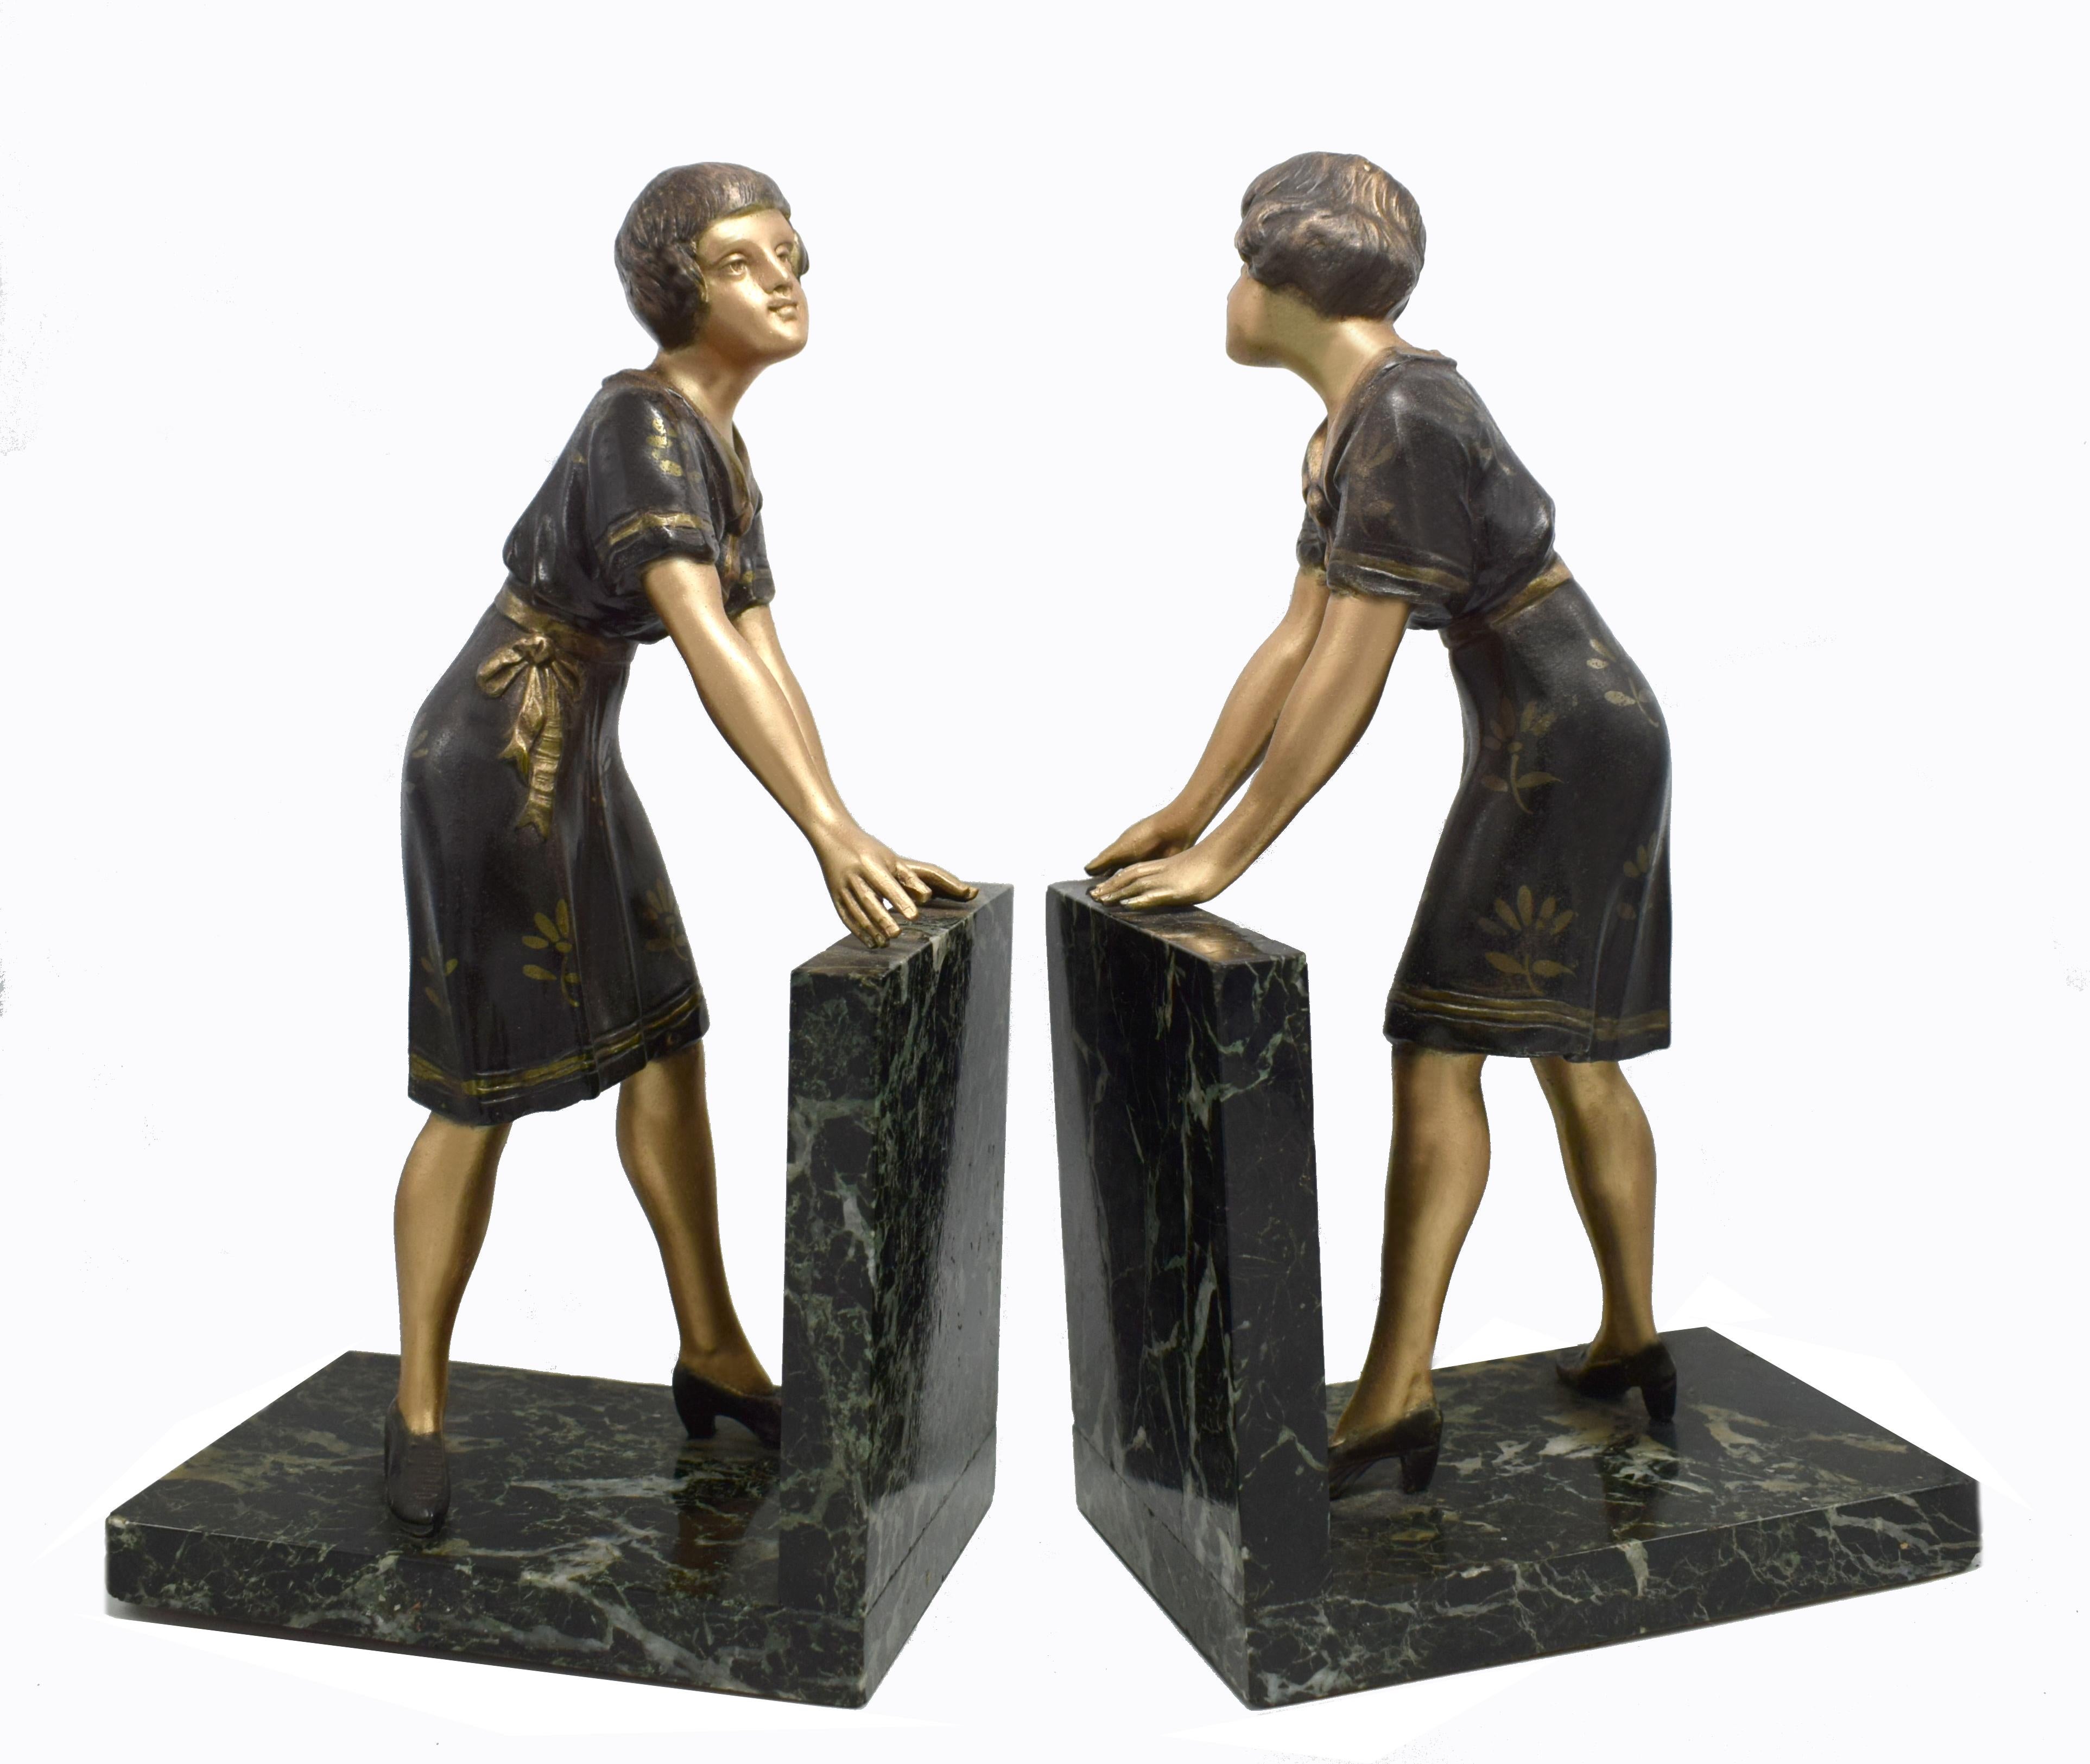 Stylish matching pair of Art Deco figural bookends dating to the 1930s. Originating from France the figures are made from cold painted spelter and rest on solid marble plinths. Dressed in the fashion of the day with curled bob hair cuts, little